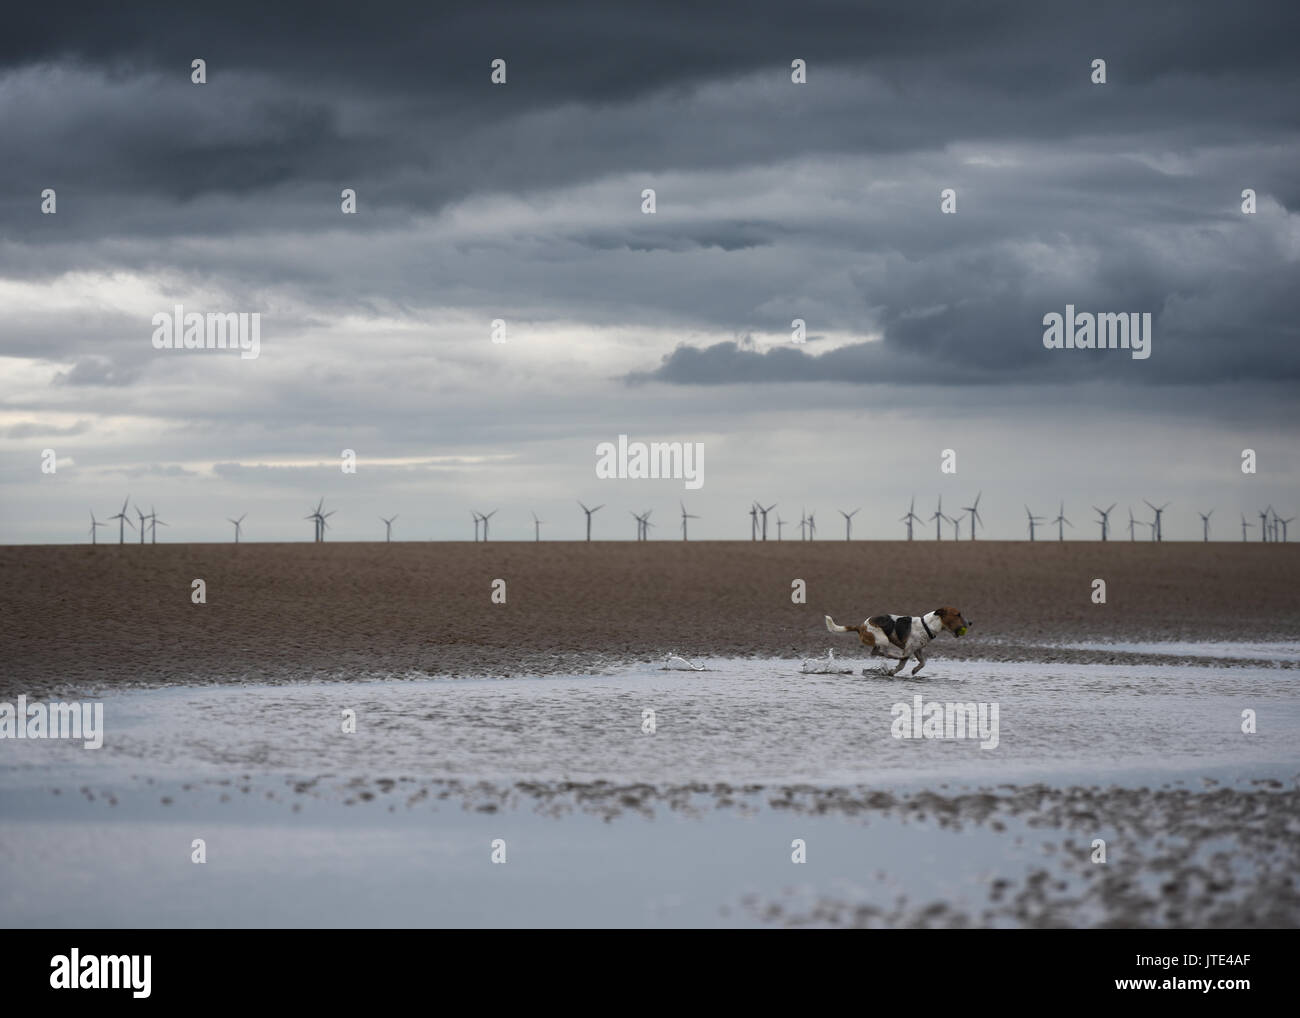 Dog running along beach with wind turbines in background Stock Photo